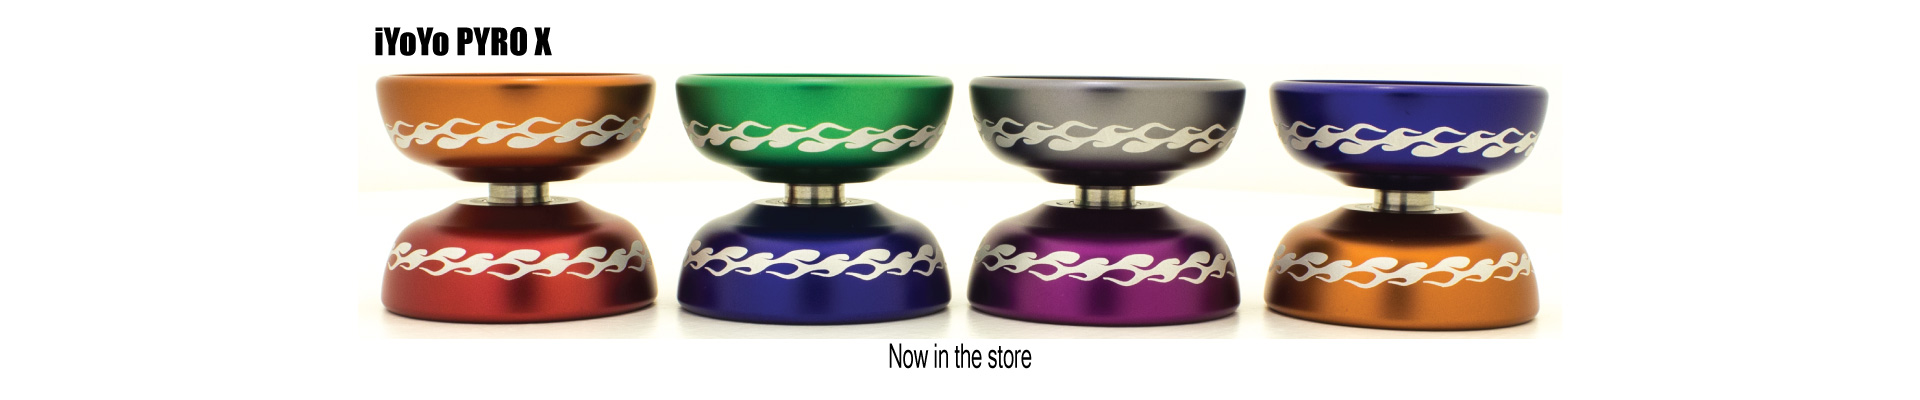 iYoYo PYRO X now in the store